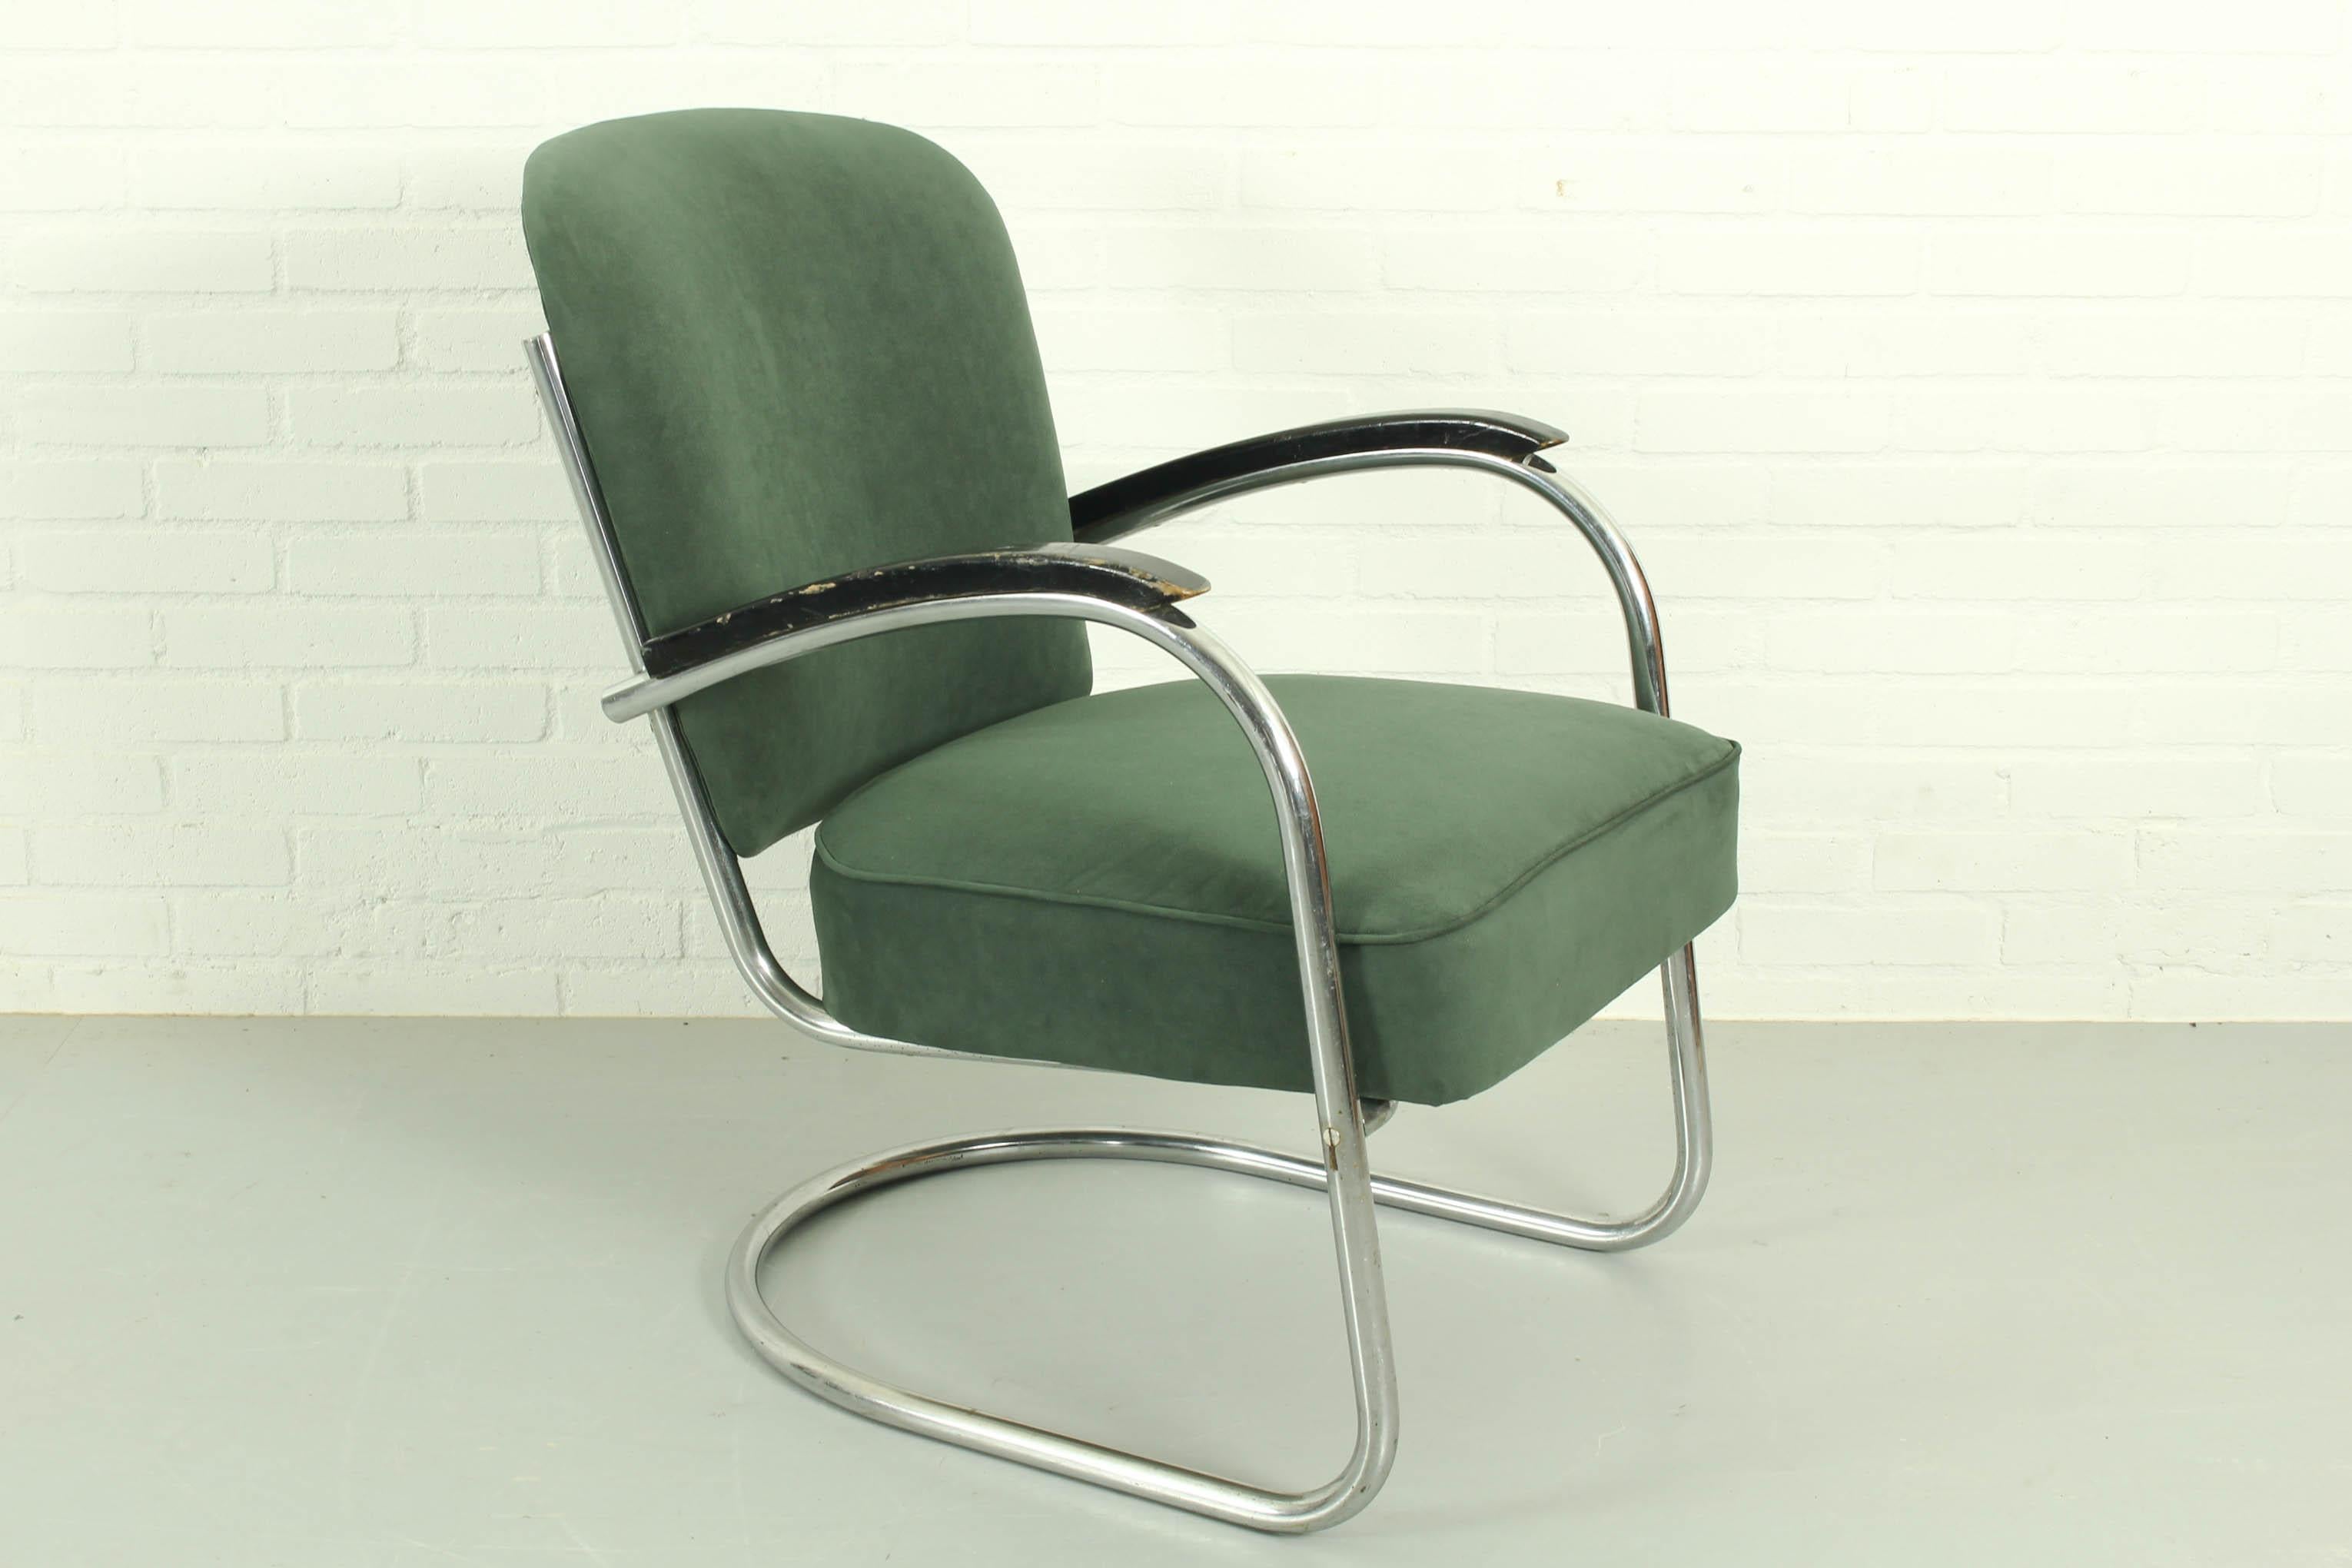 Dutch Model 436 Lounge Chair by Paul Schuitema For D3, 1930s For Sale